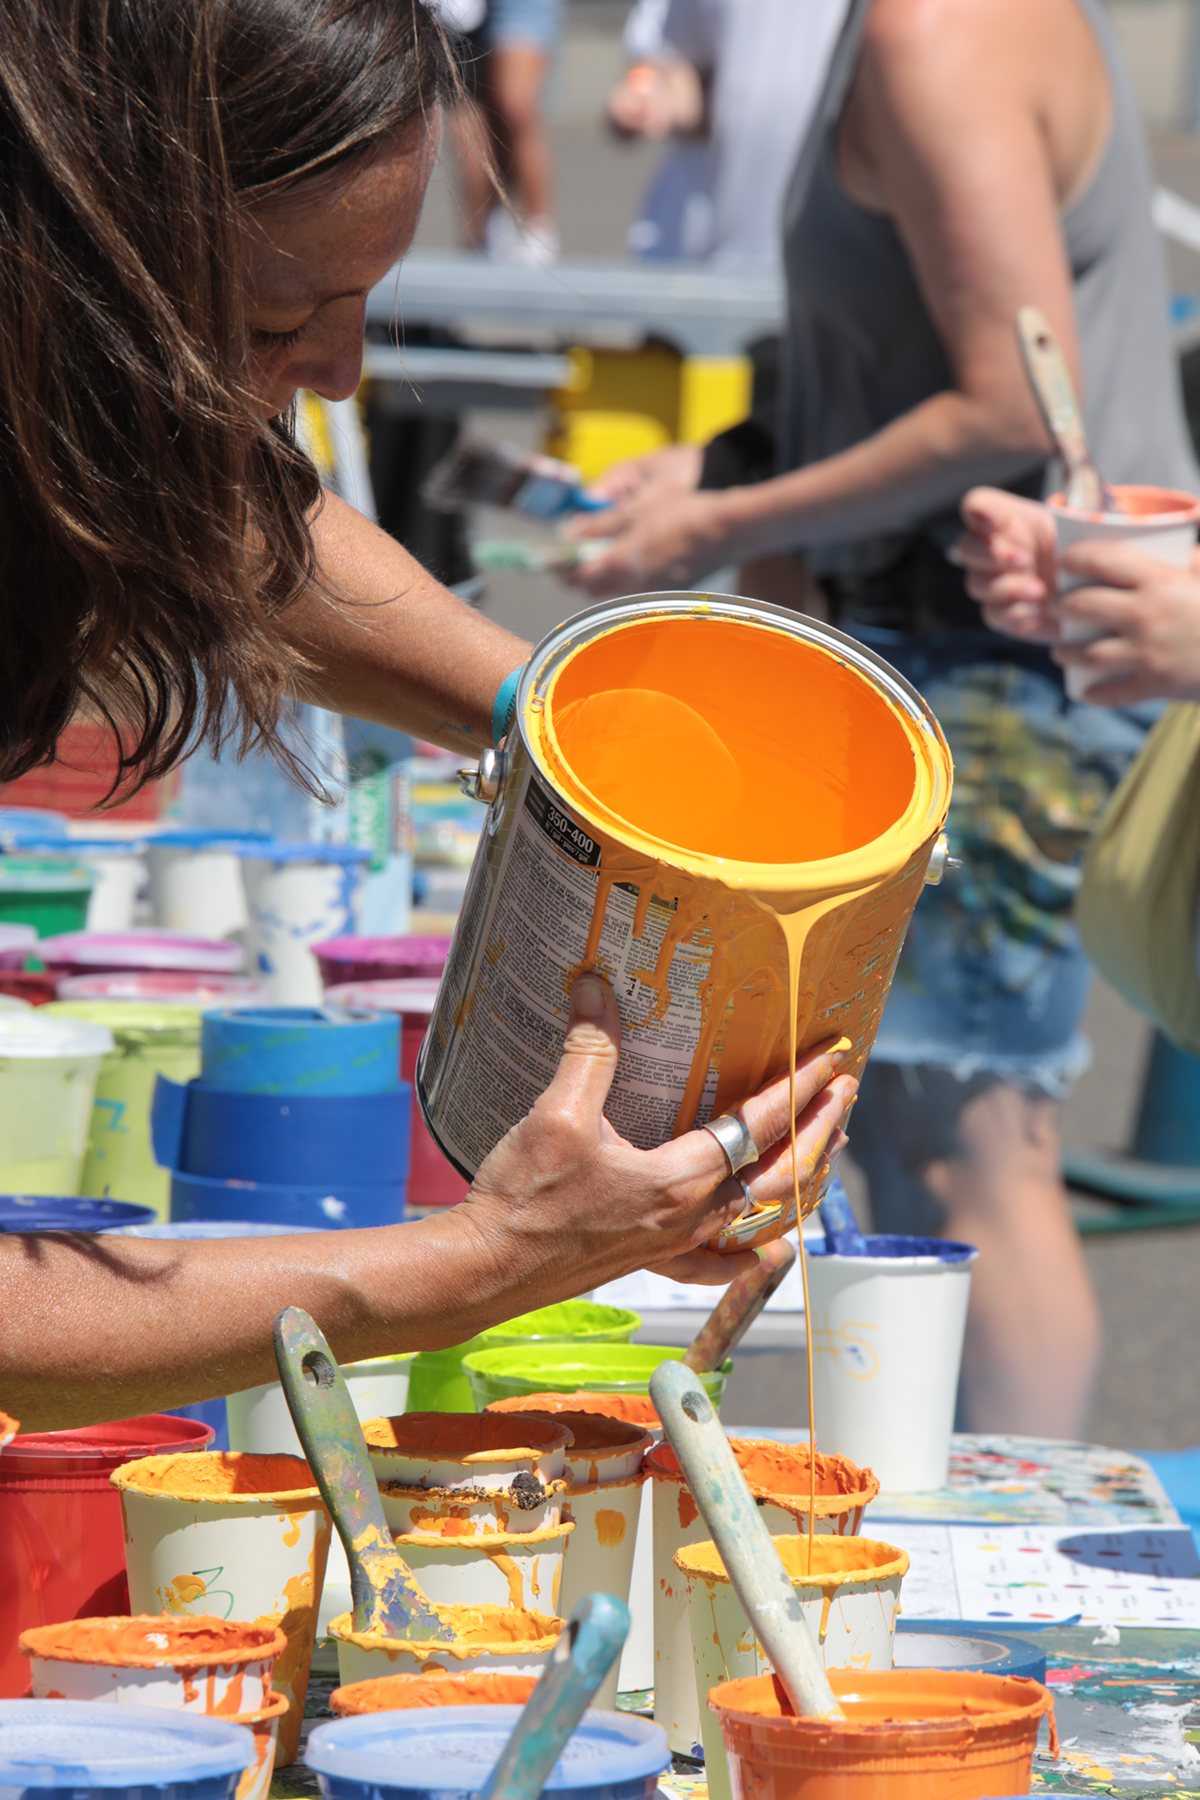 Bright orange paint is poured into cups for visitors to use.